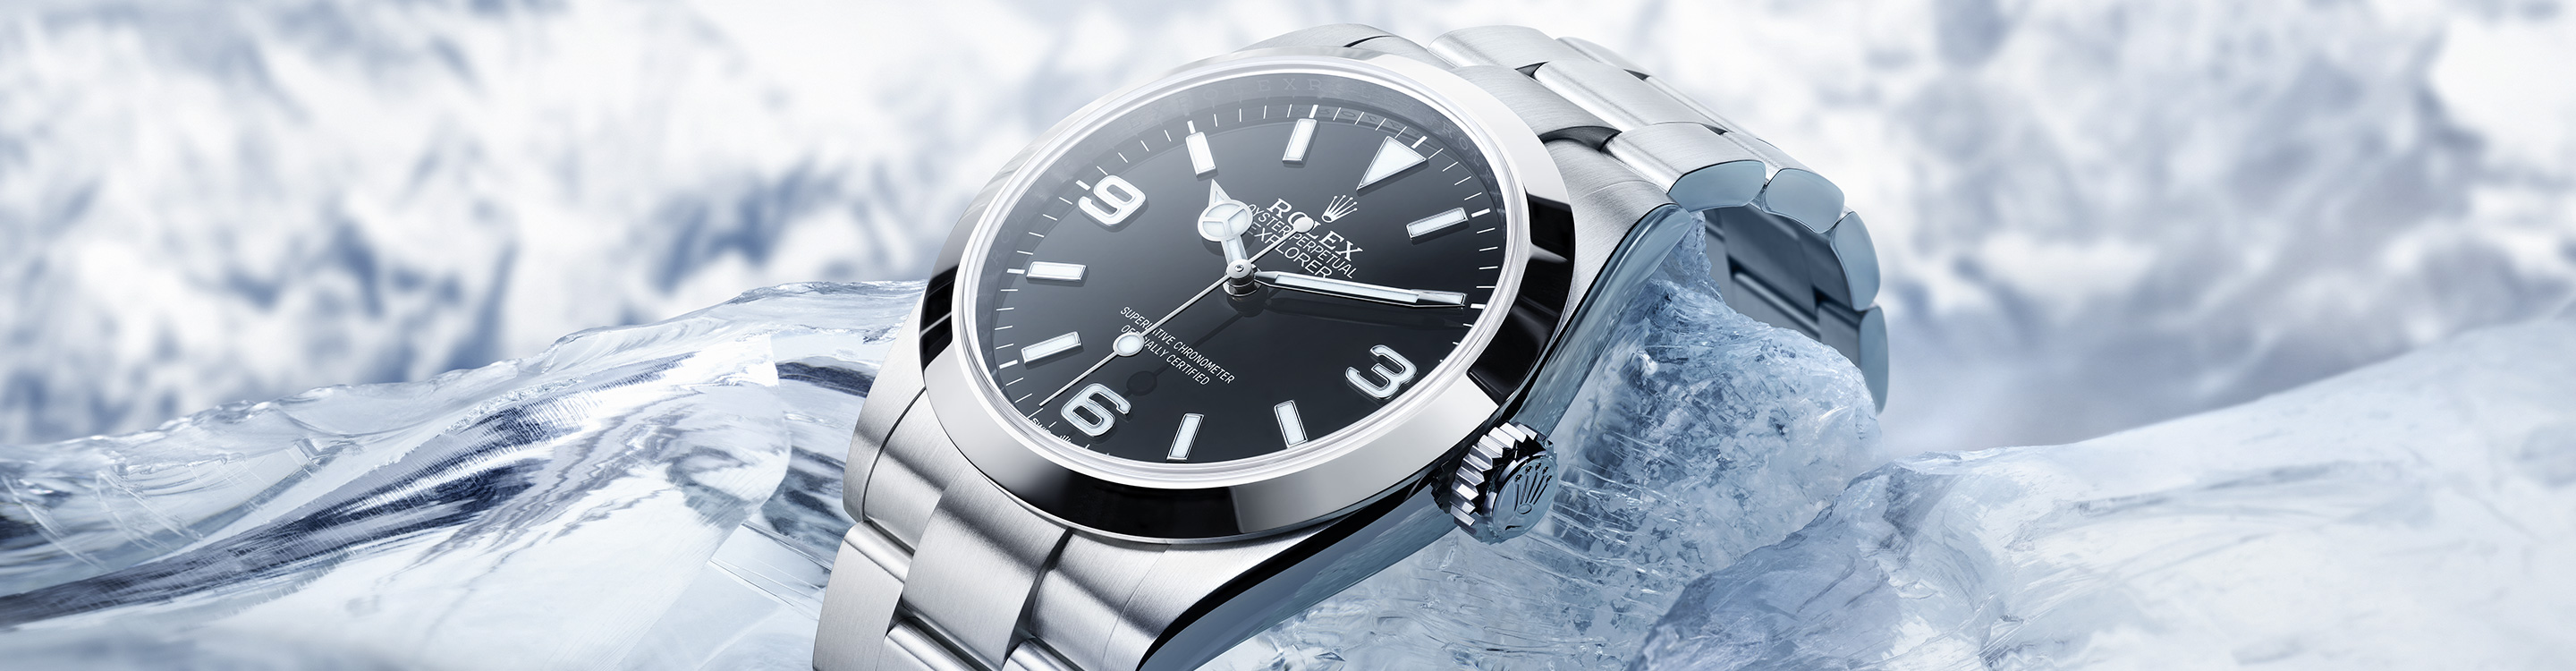 Rolex Explorer silver watch with black dial, on ice